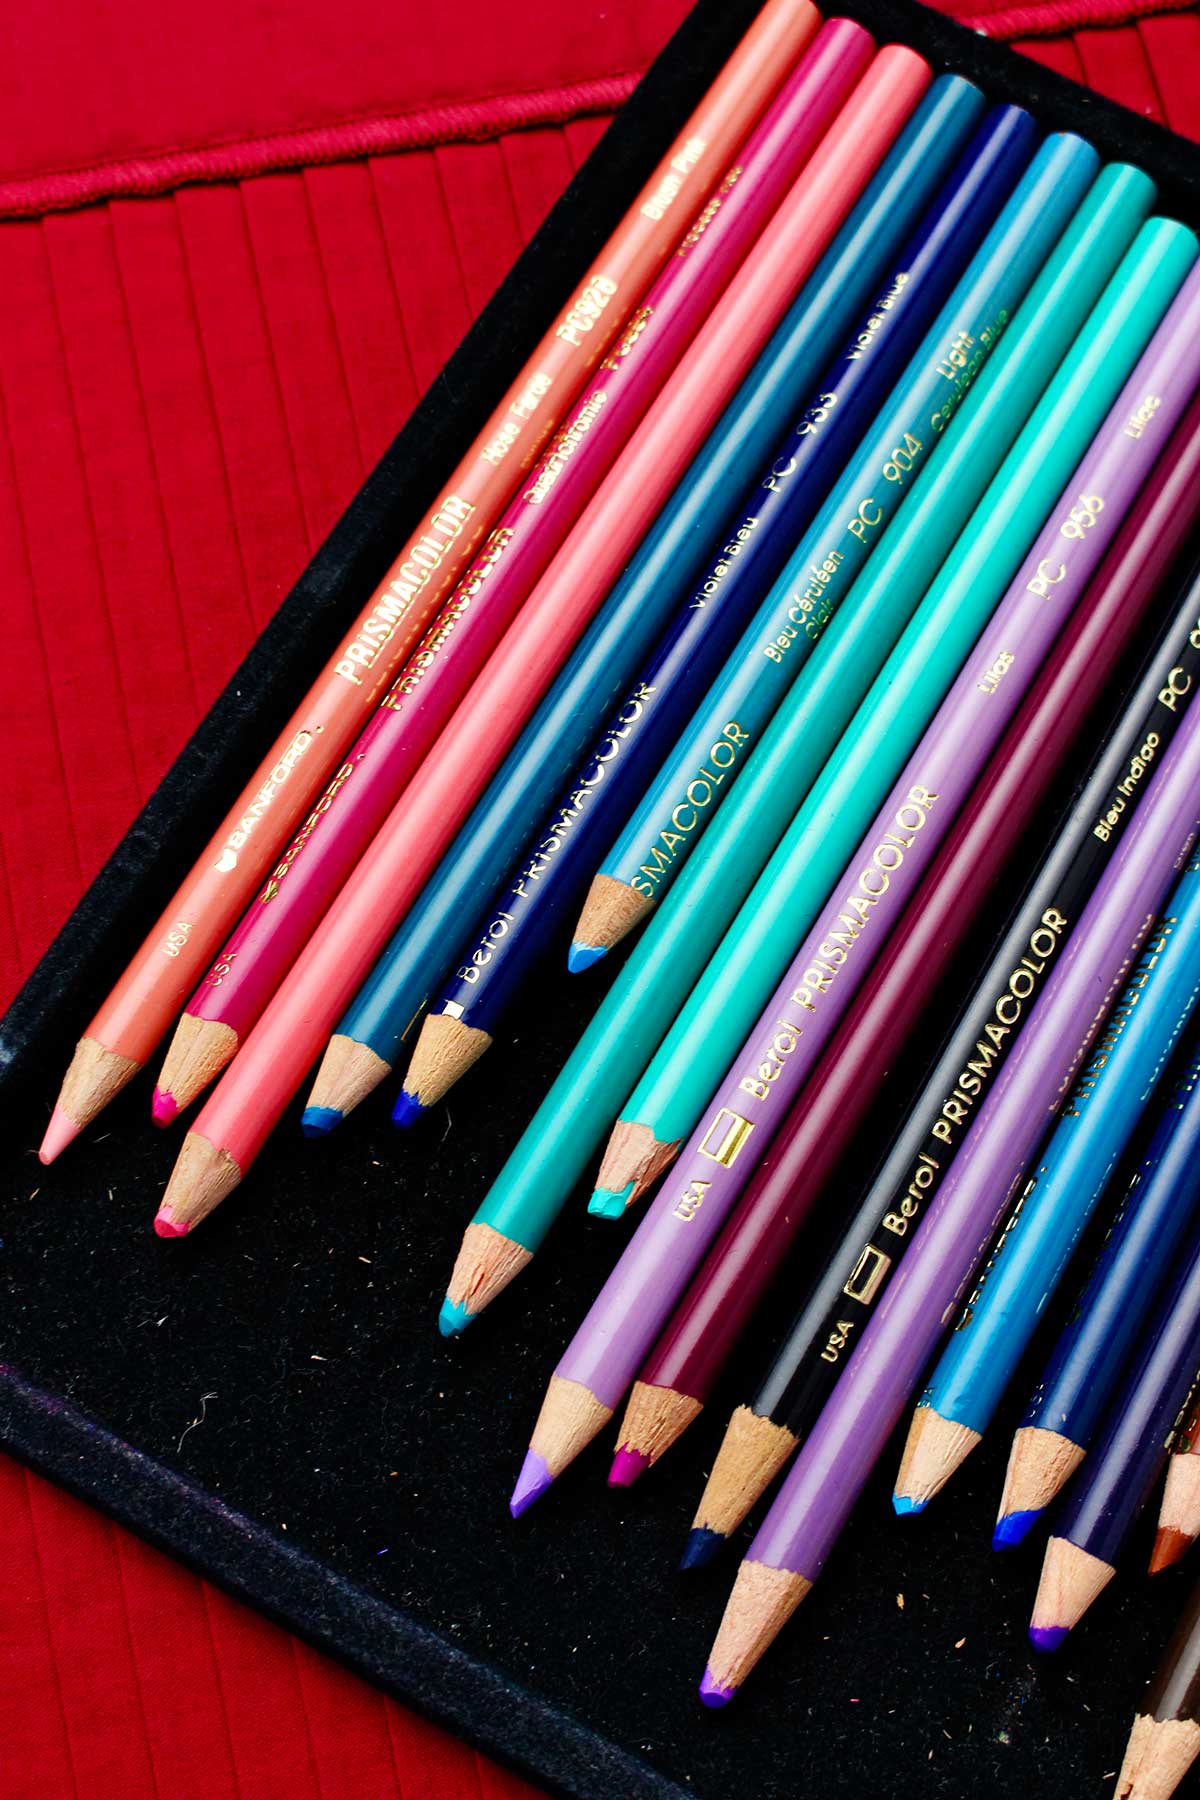 Image of jewel toned colored pencils in case resting on a red placemat.